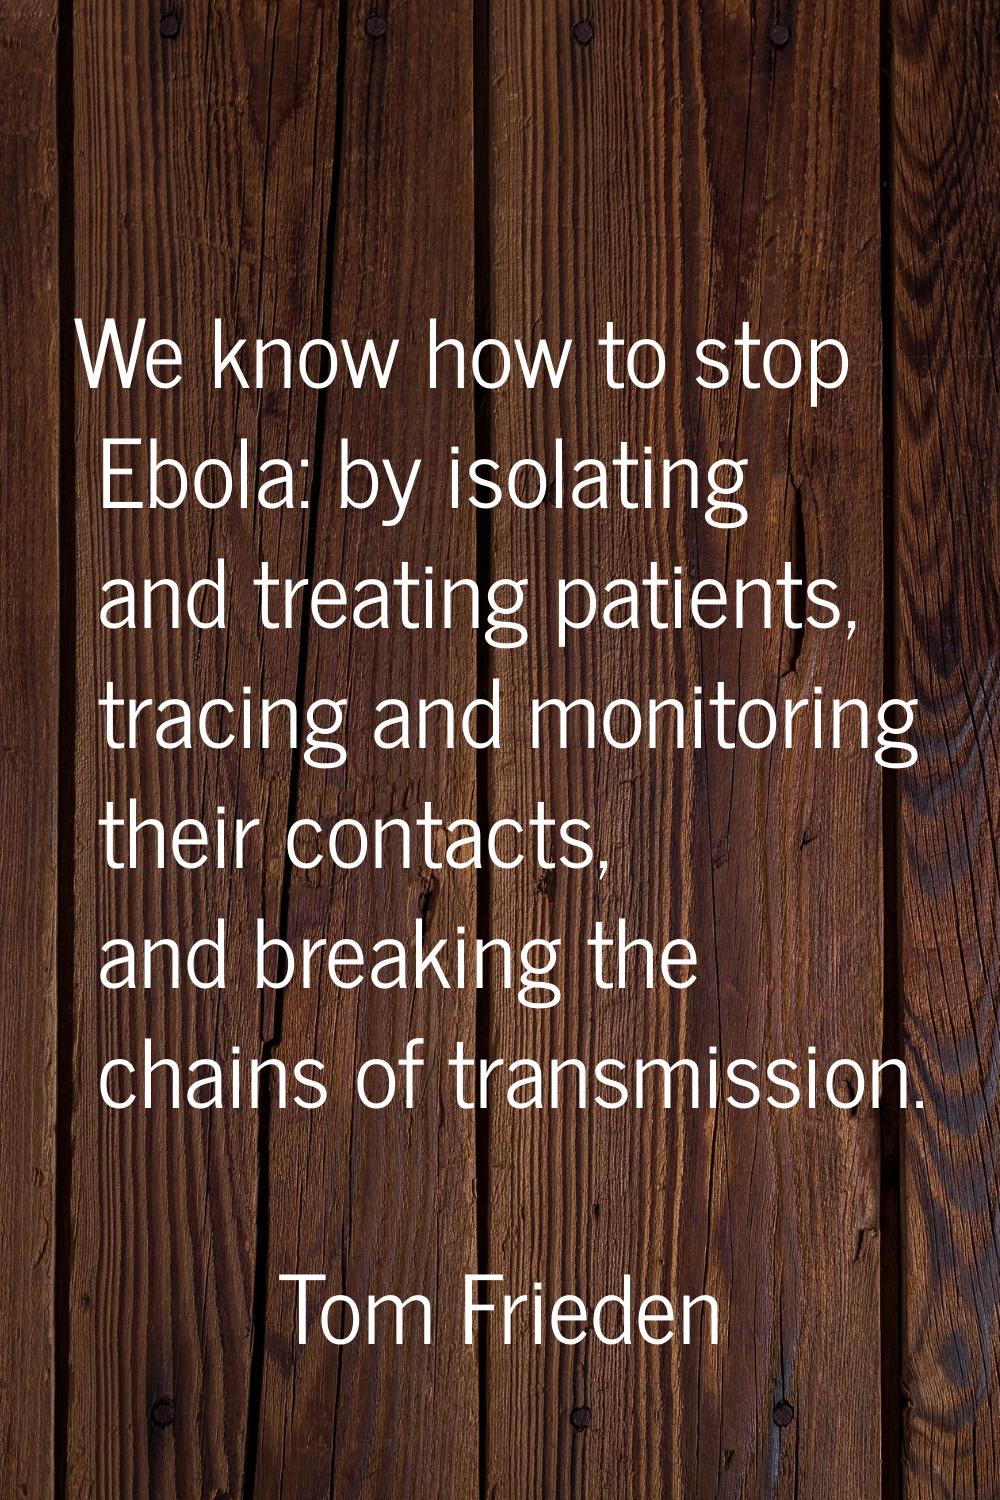 We know how to stop Ebola: by isolating and treating patients, tracing and monitoring their contact